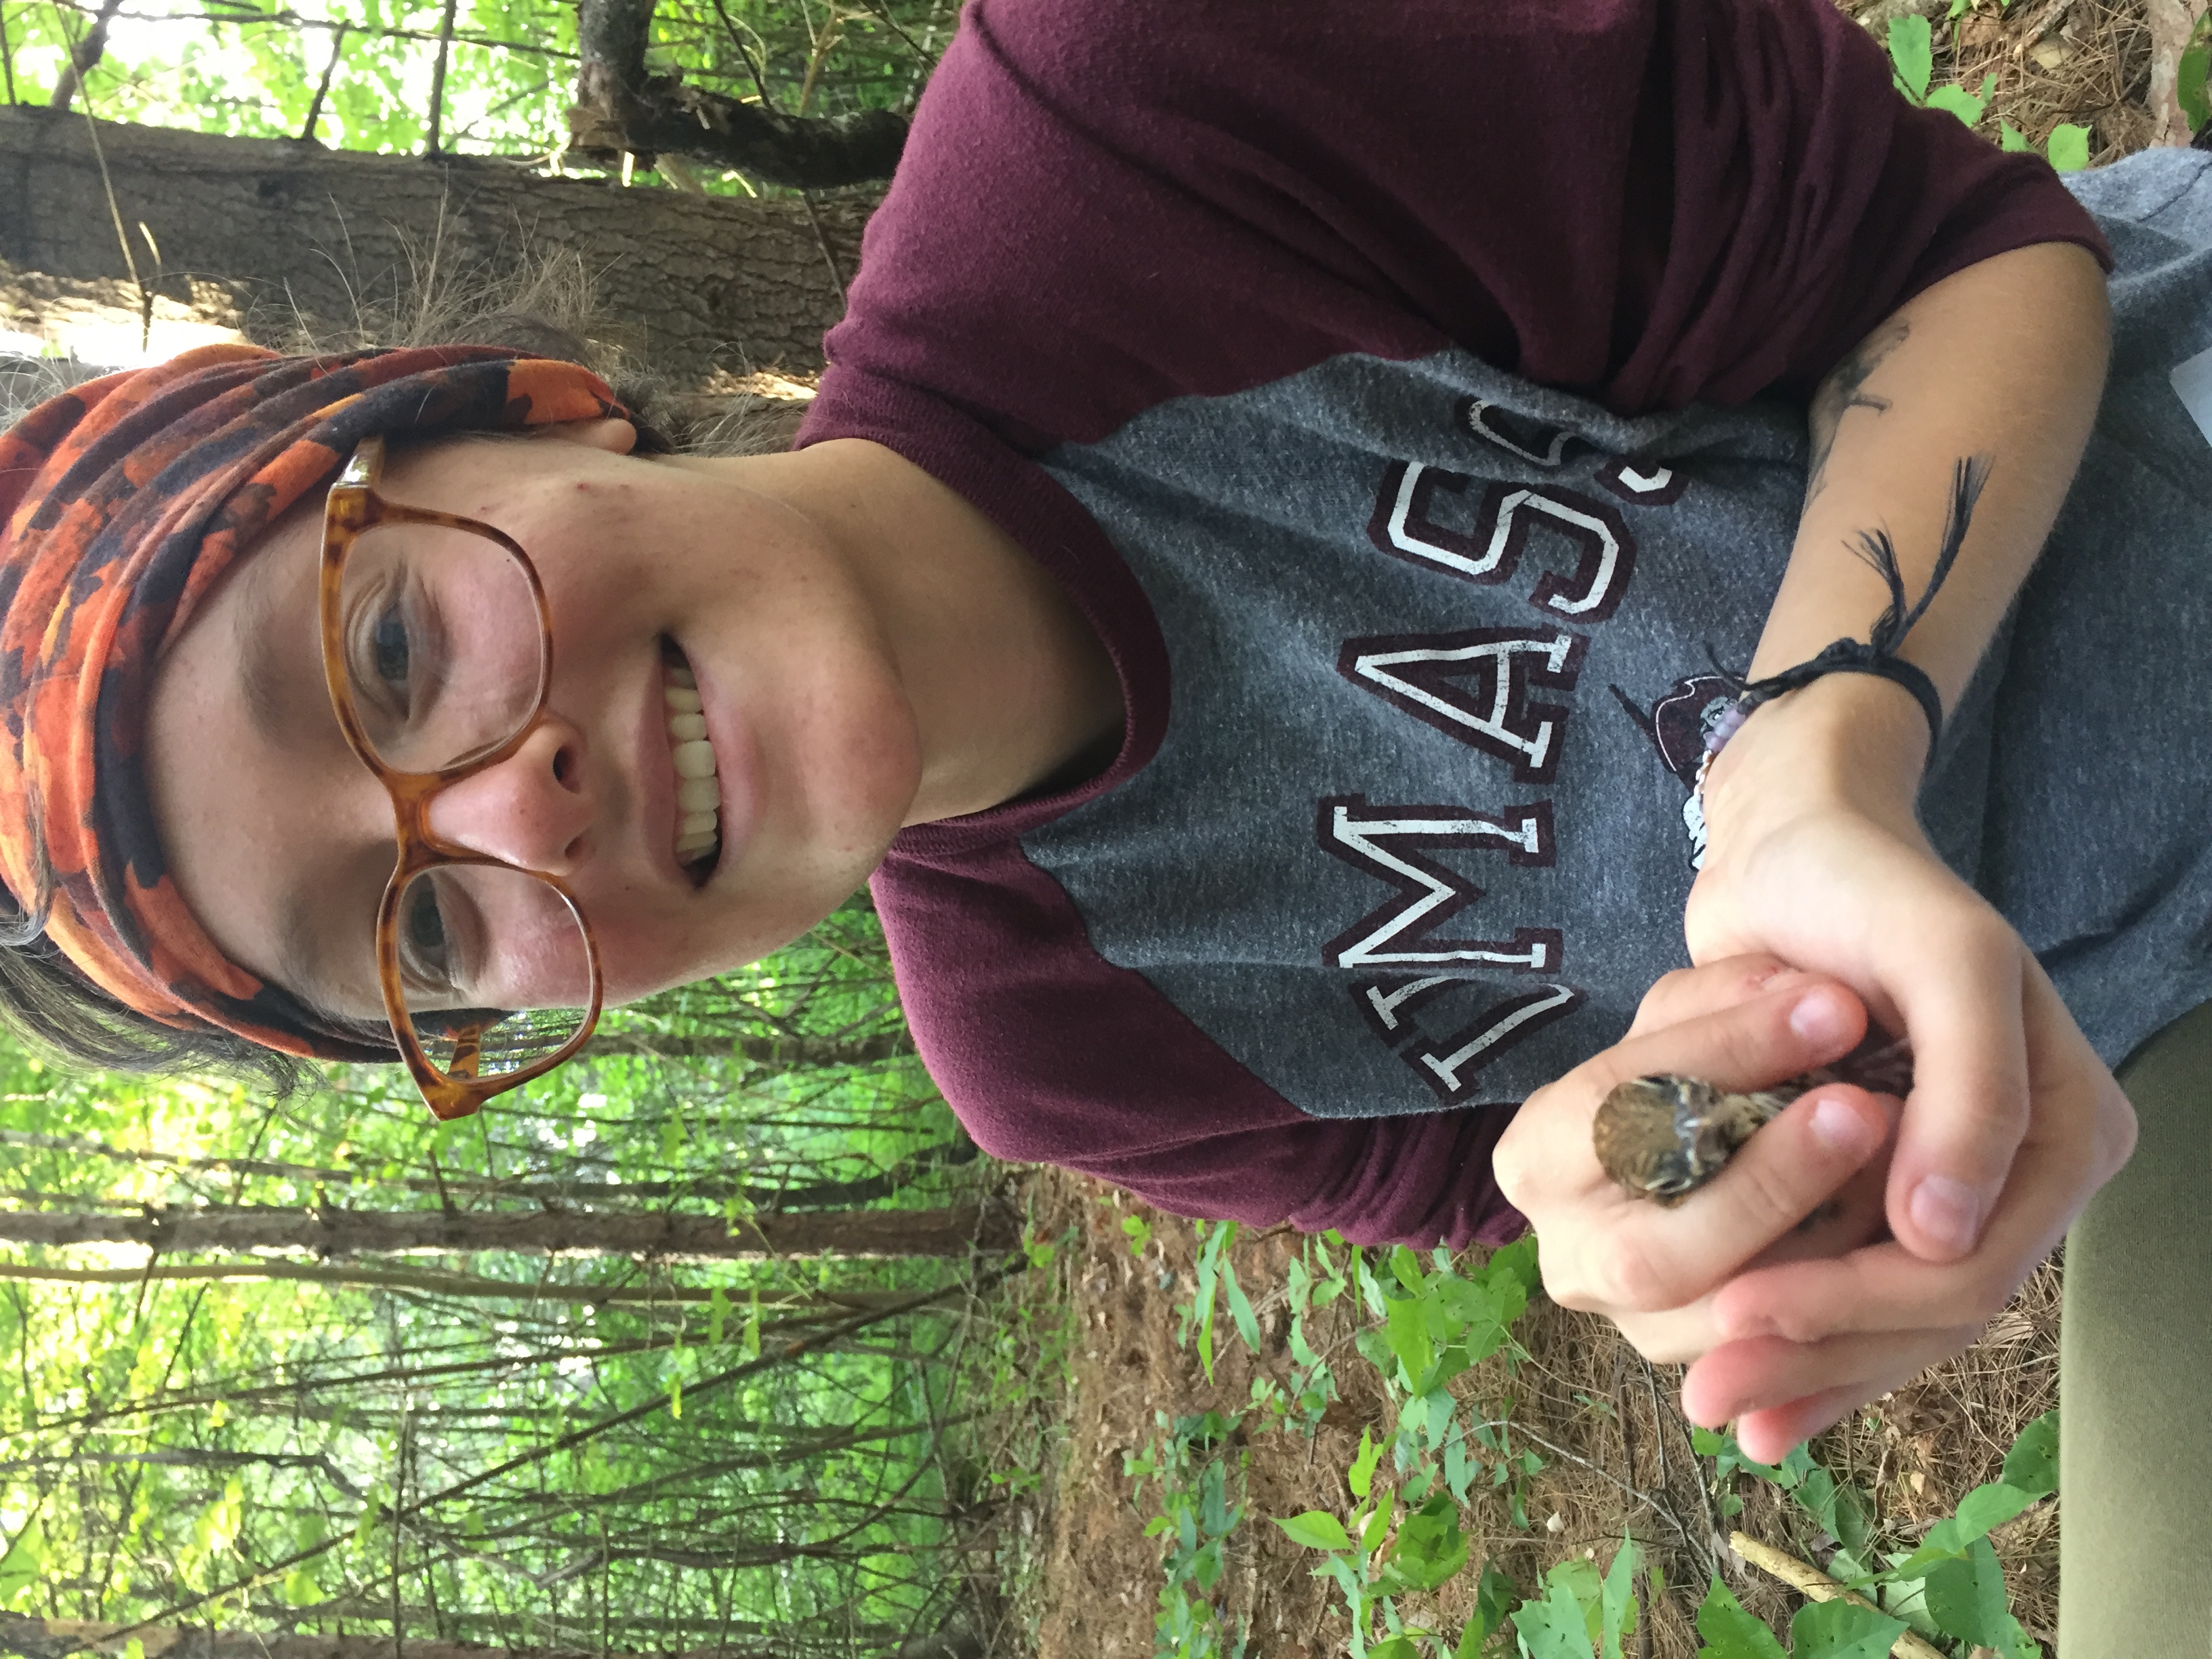 Jodie holding a Wood Thrush chick (K. Straley, 2017)